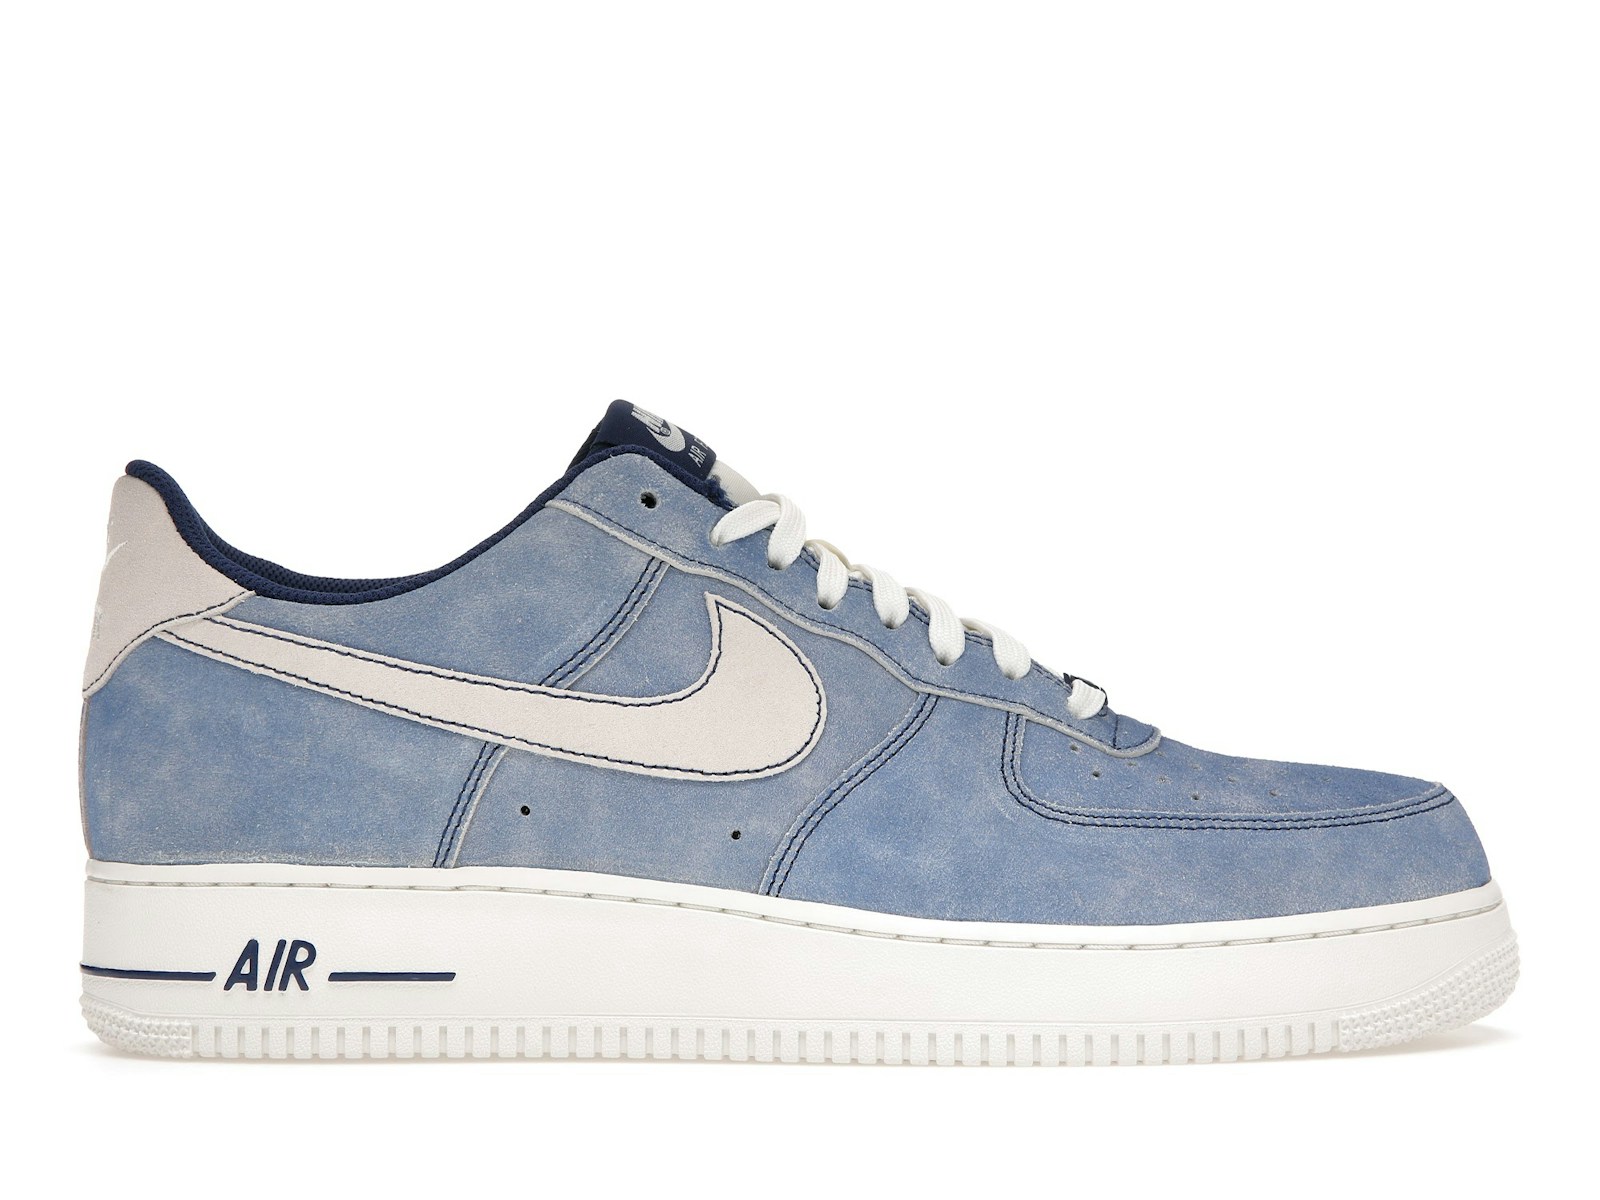 Nike Air Force 1 Low Dusty Blue Suede DH0265400